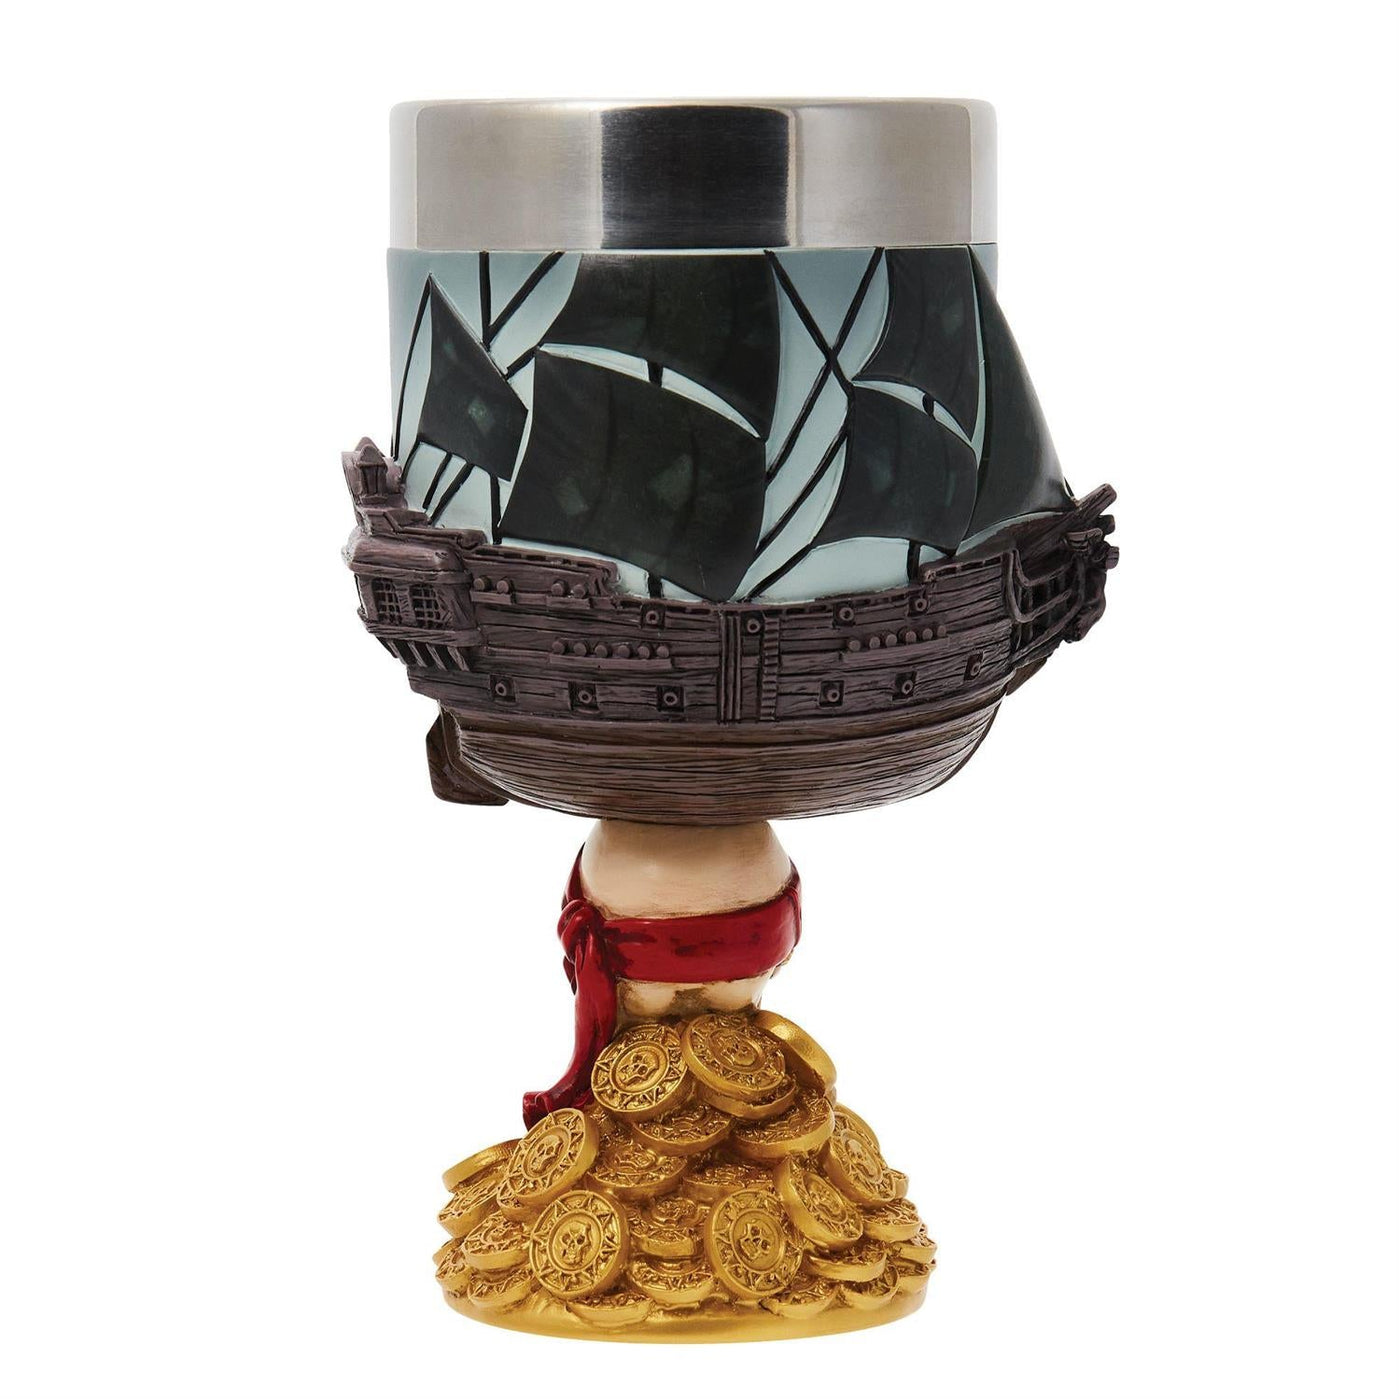 Pirates of the Caribbean Goblet 7" - Official Disney Licensed